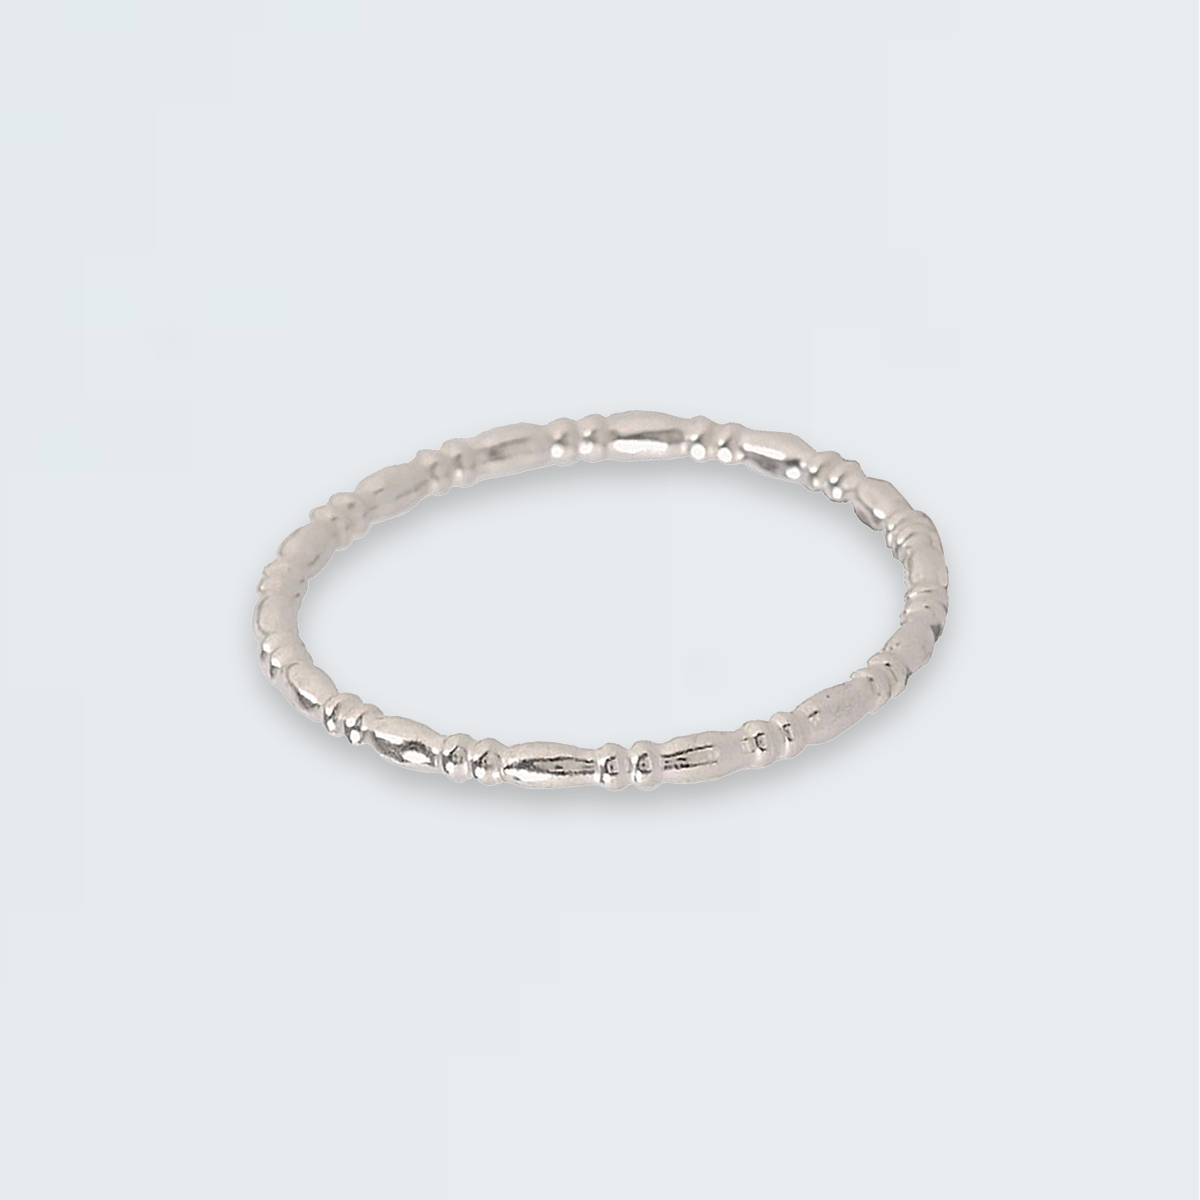 STACKING RING "RIPPLE" - STERLING SILVER